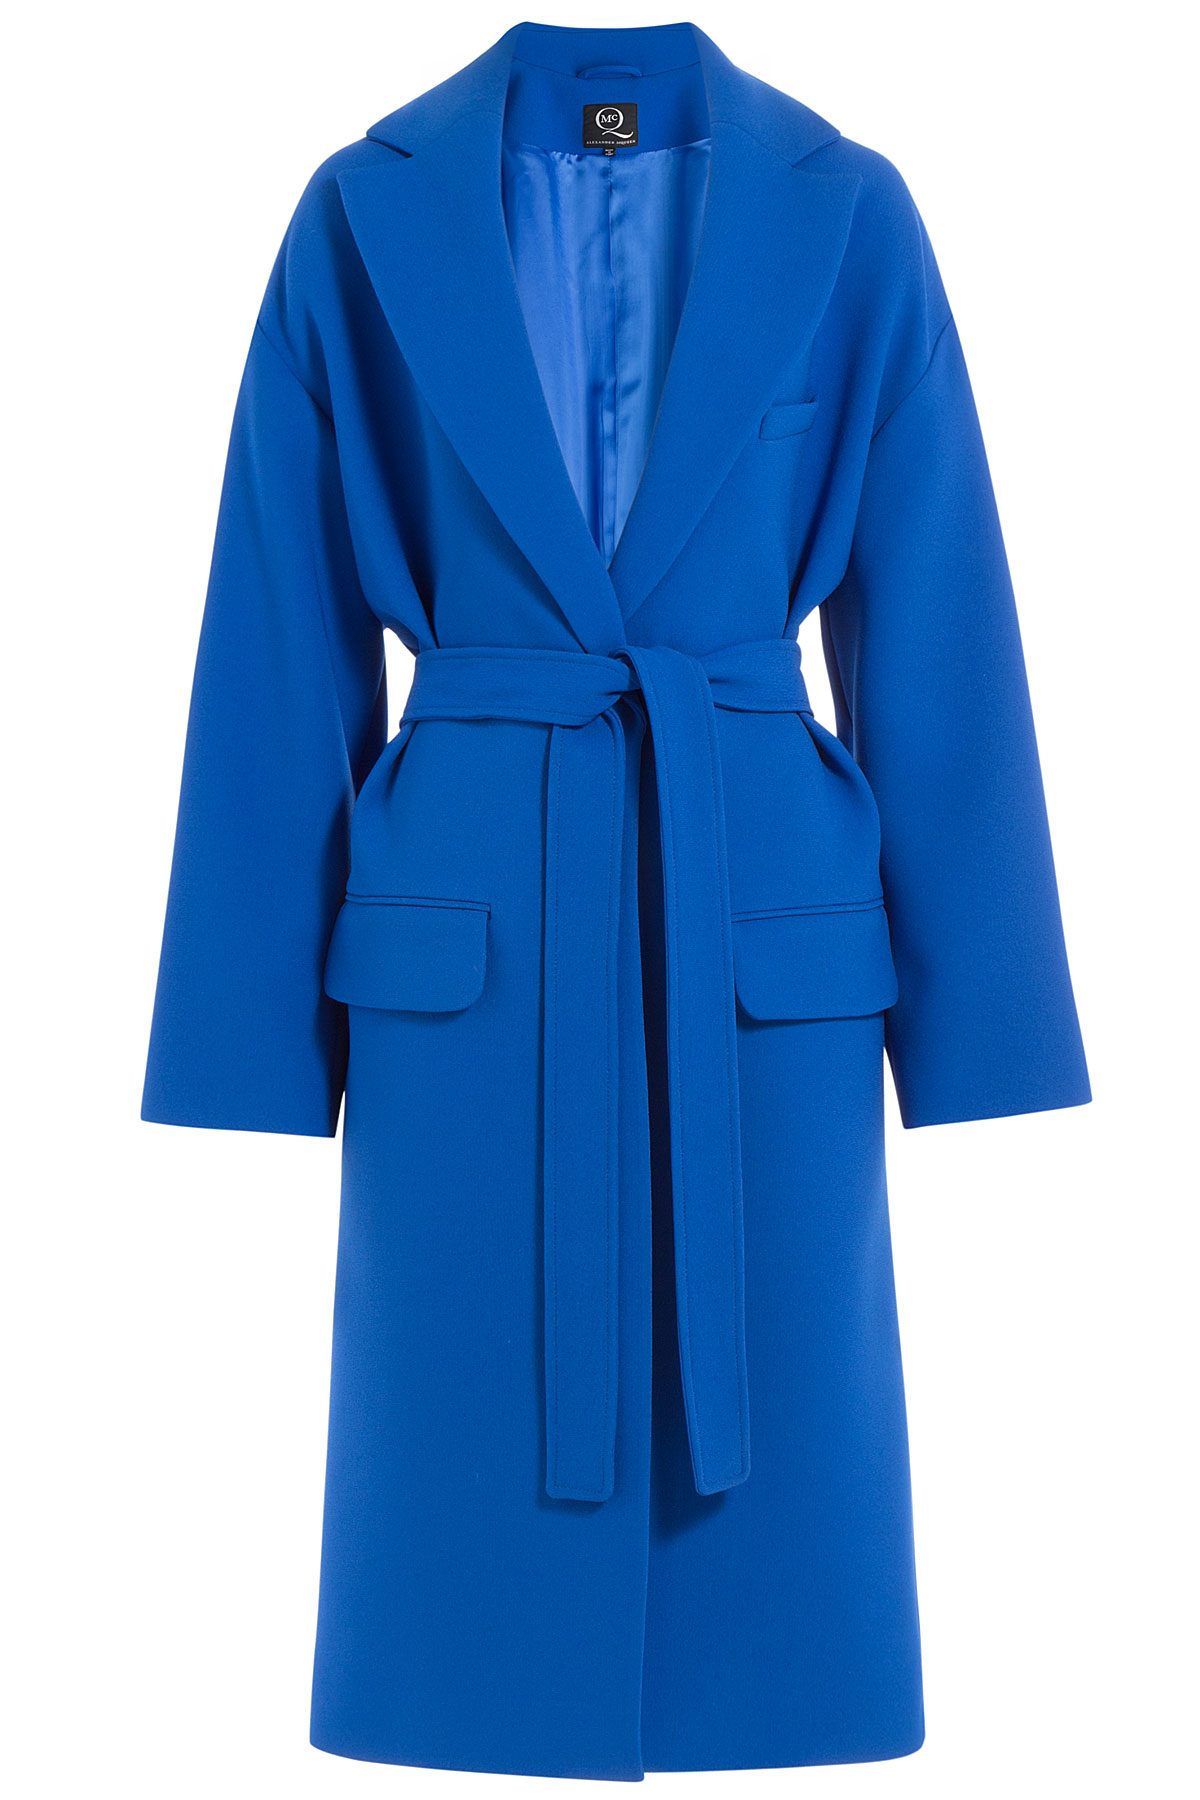 royal blue mcq Alexander McQueen belted coat - blue and purple